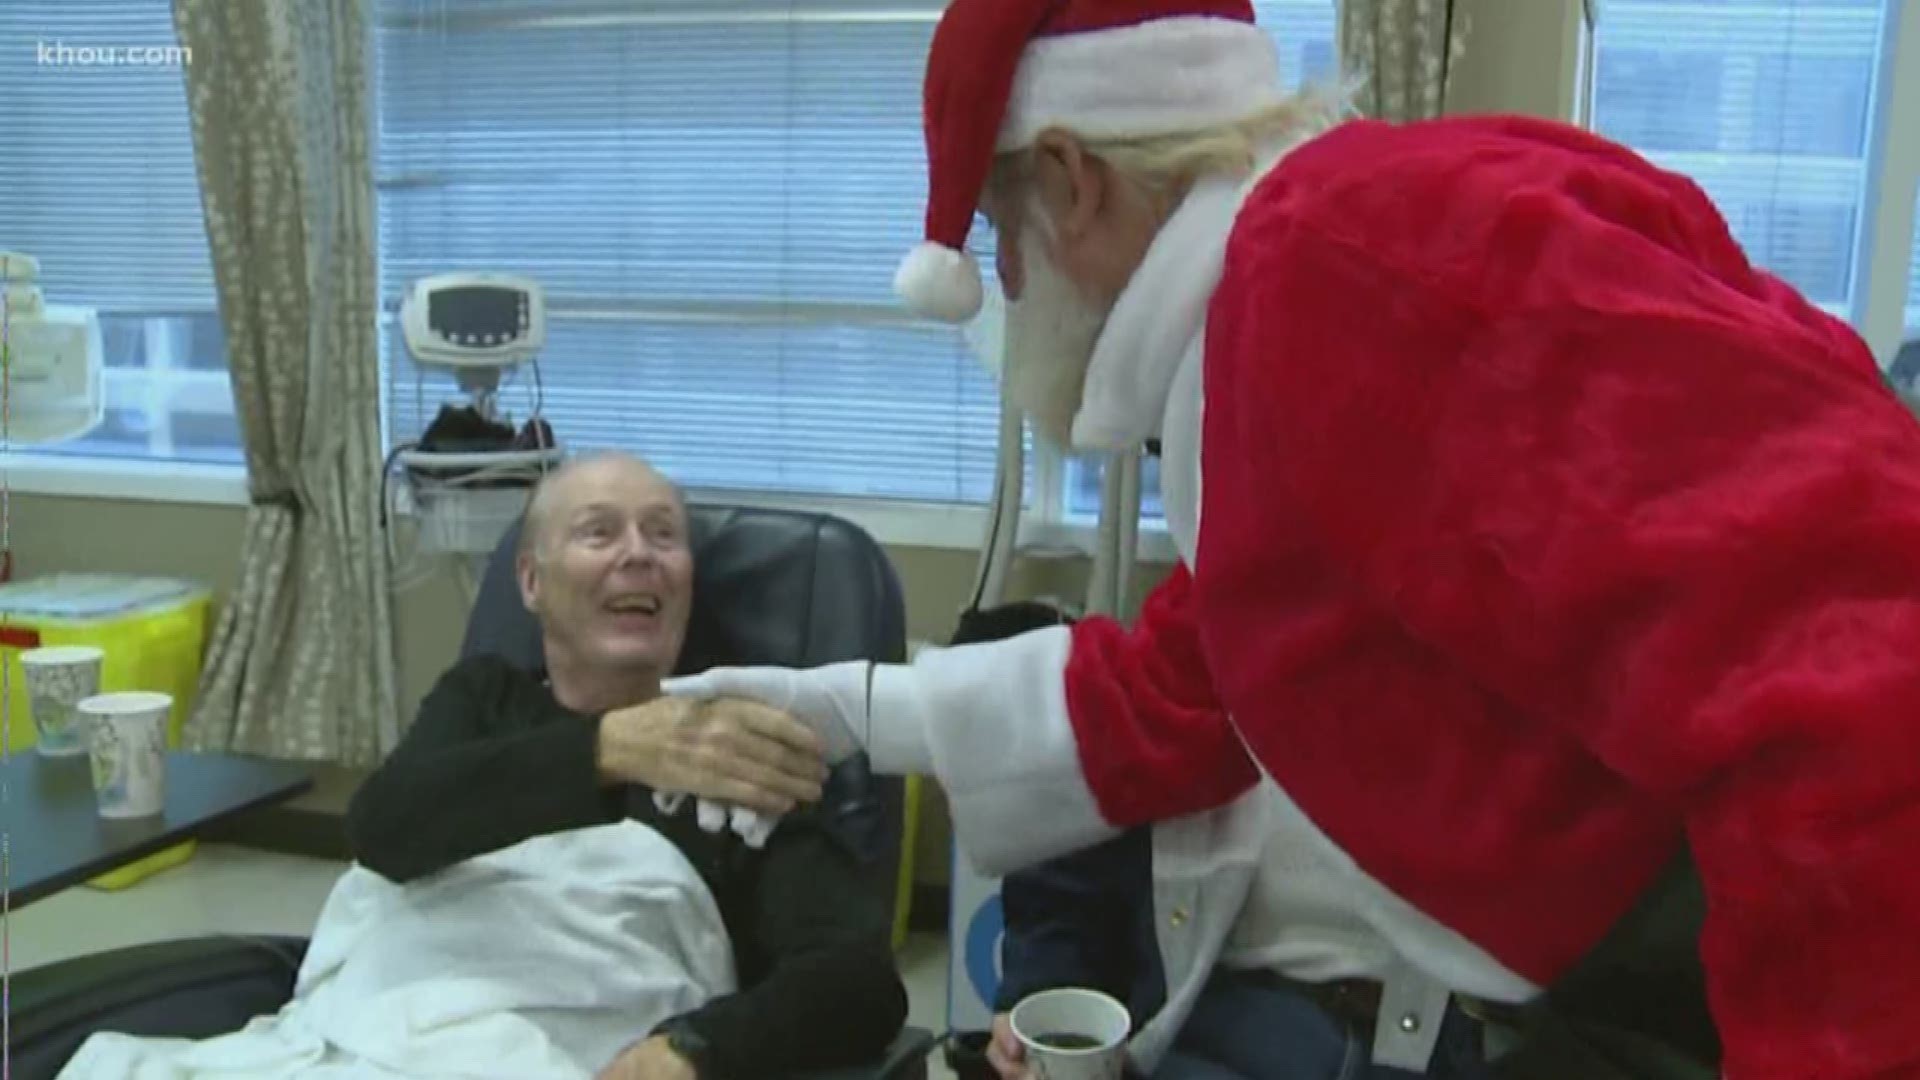 11 Great Holiday Gifts for Cancer Patients Receiving Treatment